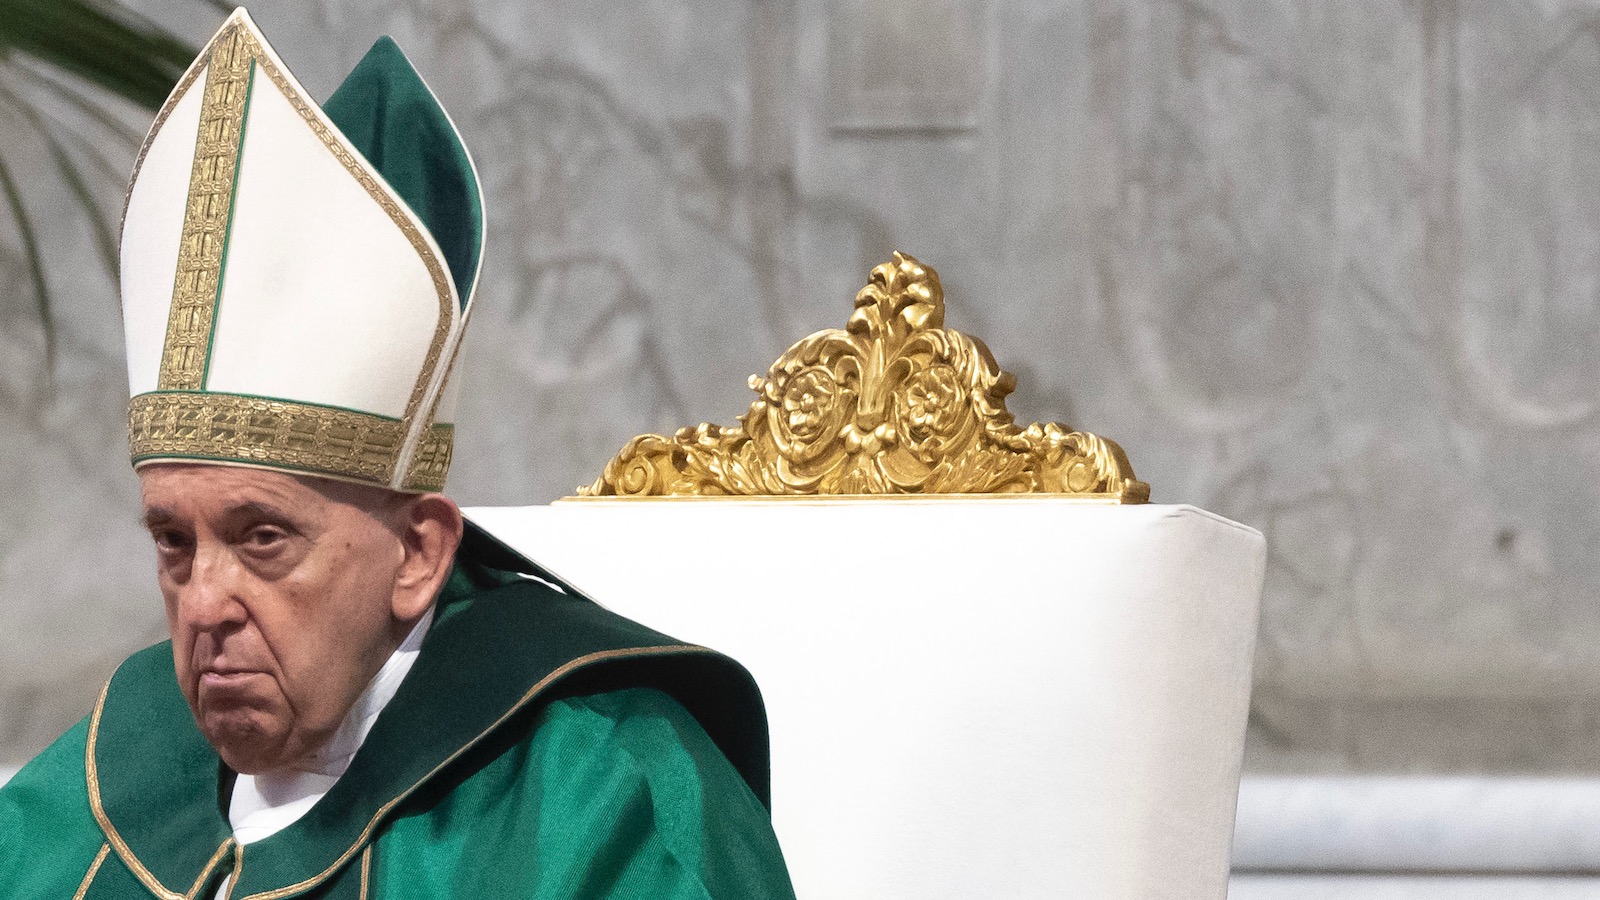 Pope Francis is seen wearing green vestments and seated in St. Peter's Basilica at the Vatican.